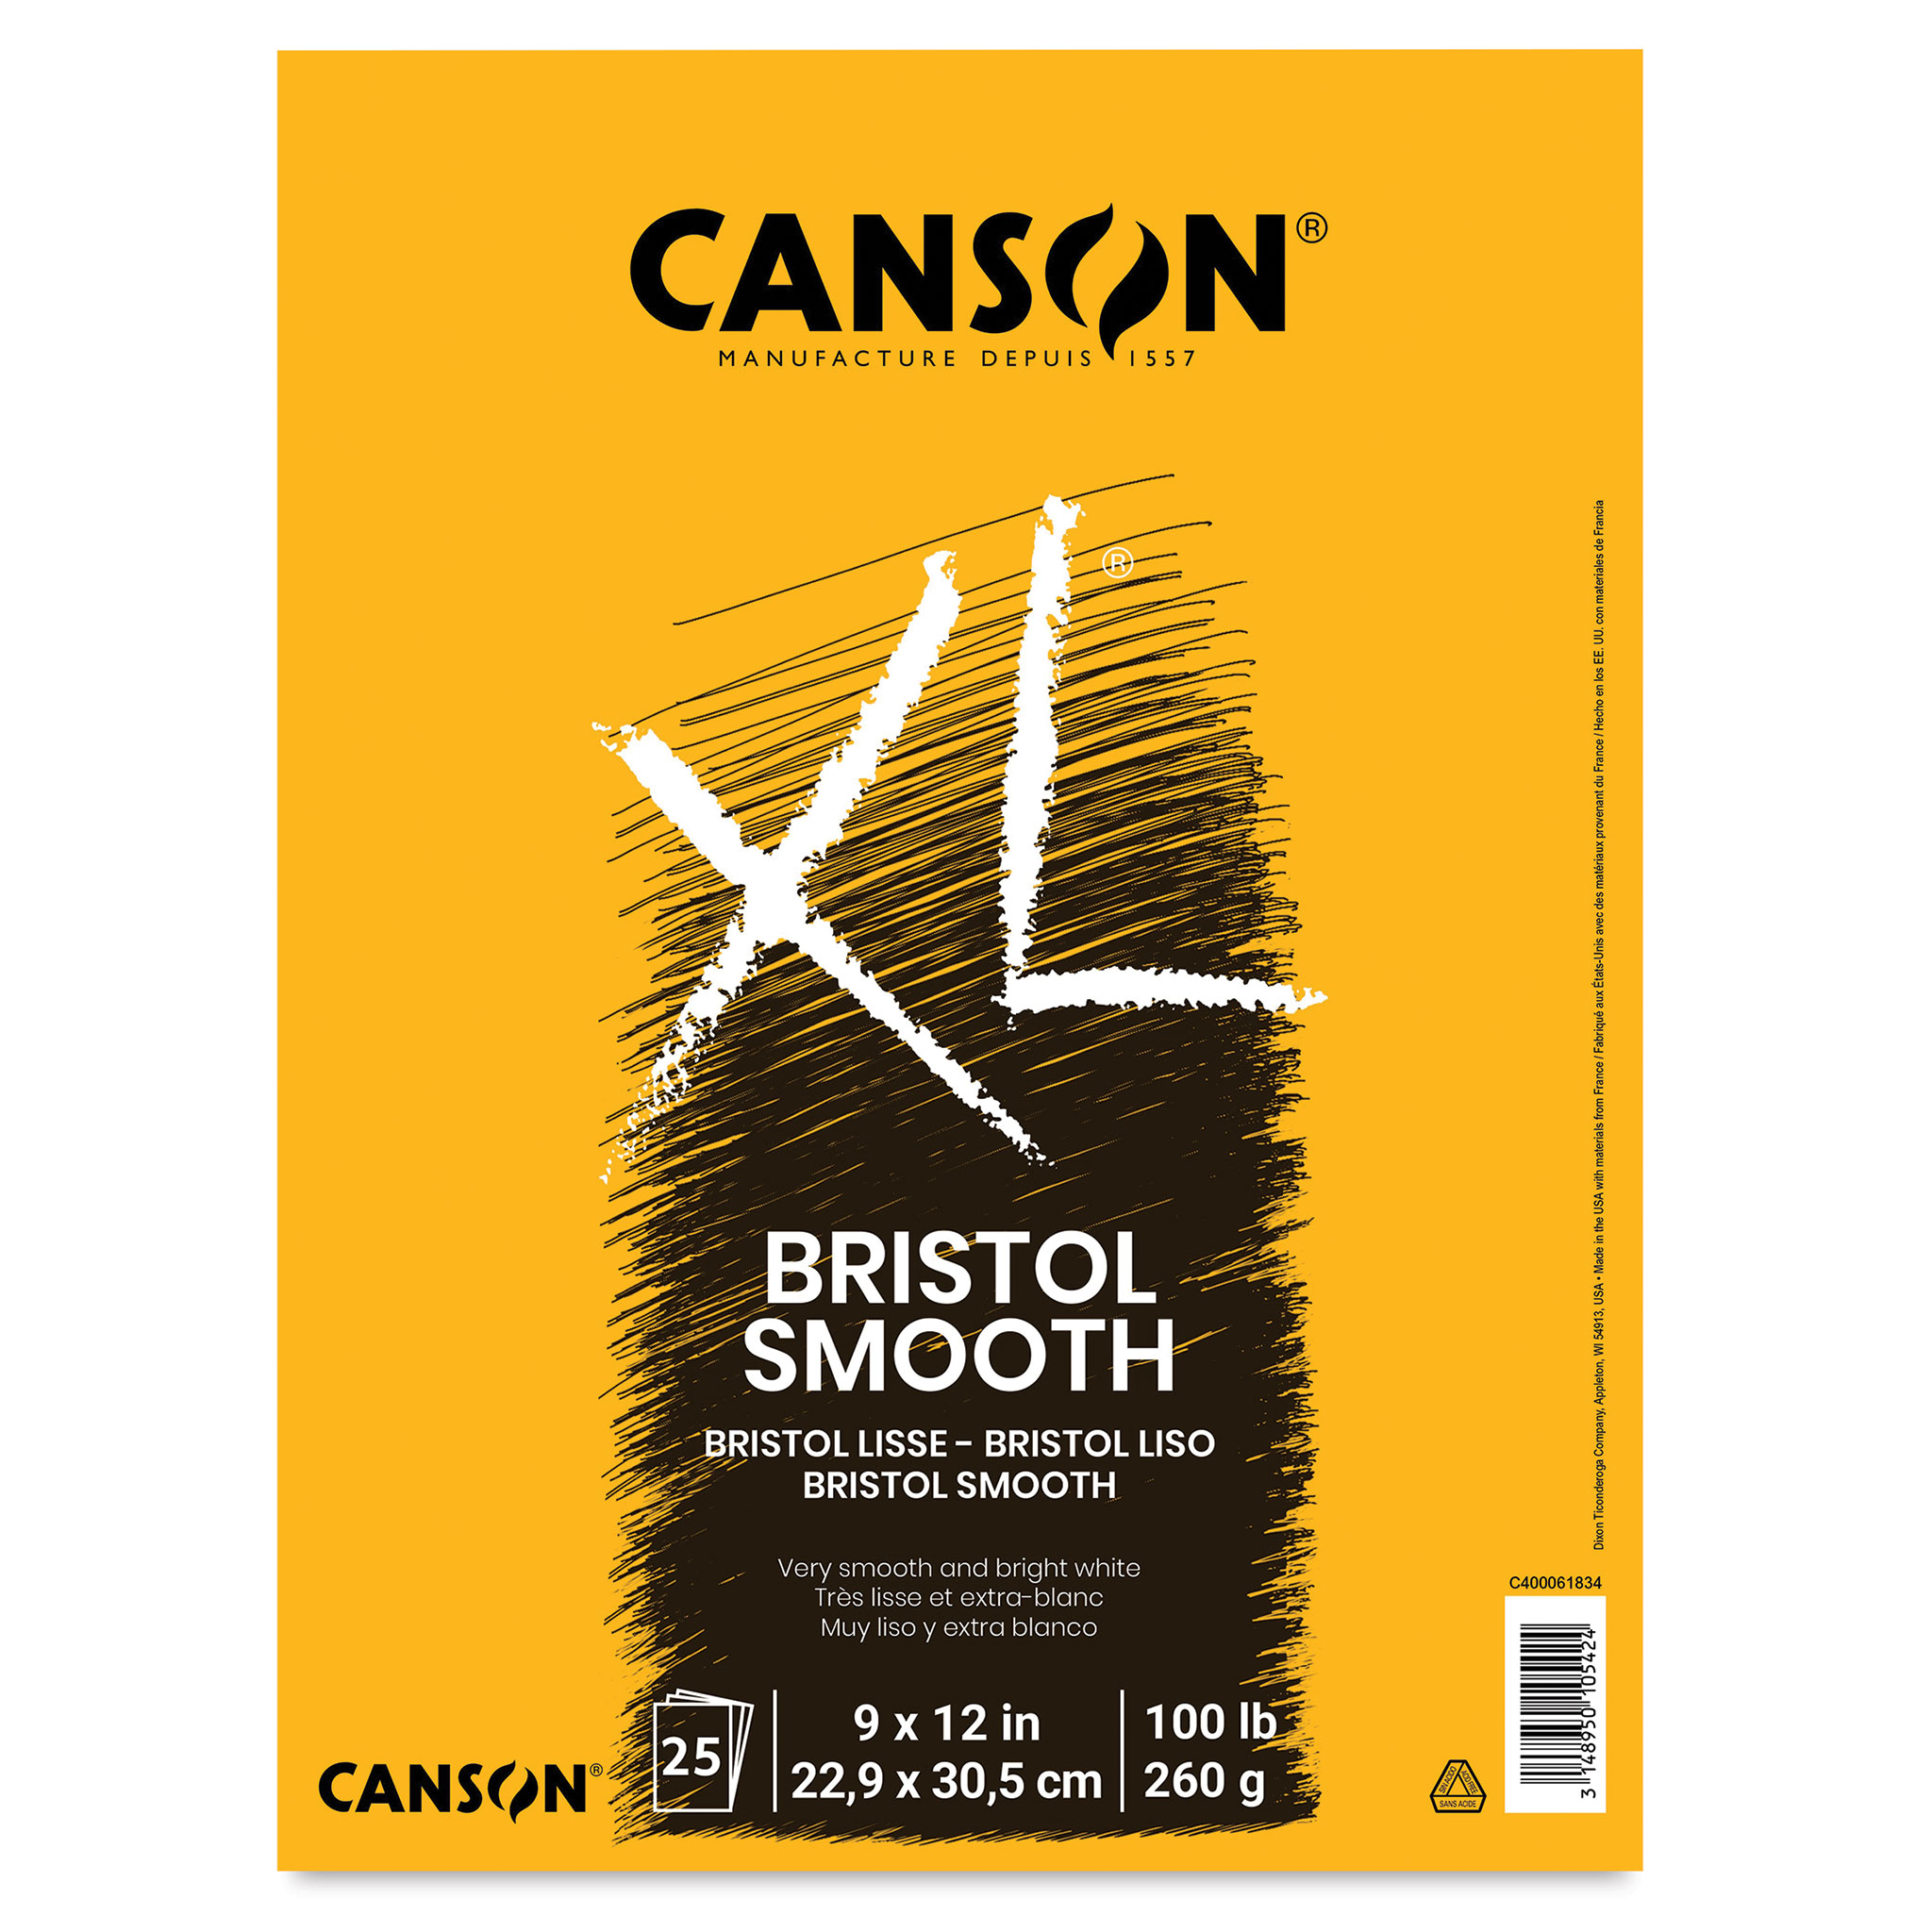 Canson XL Black Drawing Pad, 9 inch x 12 inch, 40 Sheets